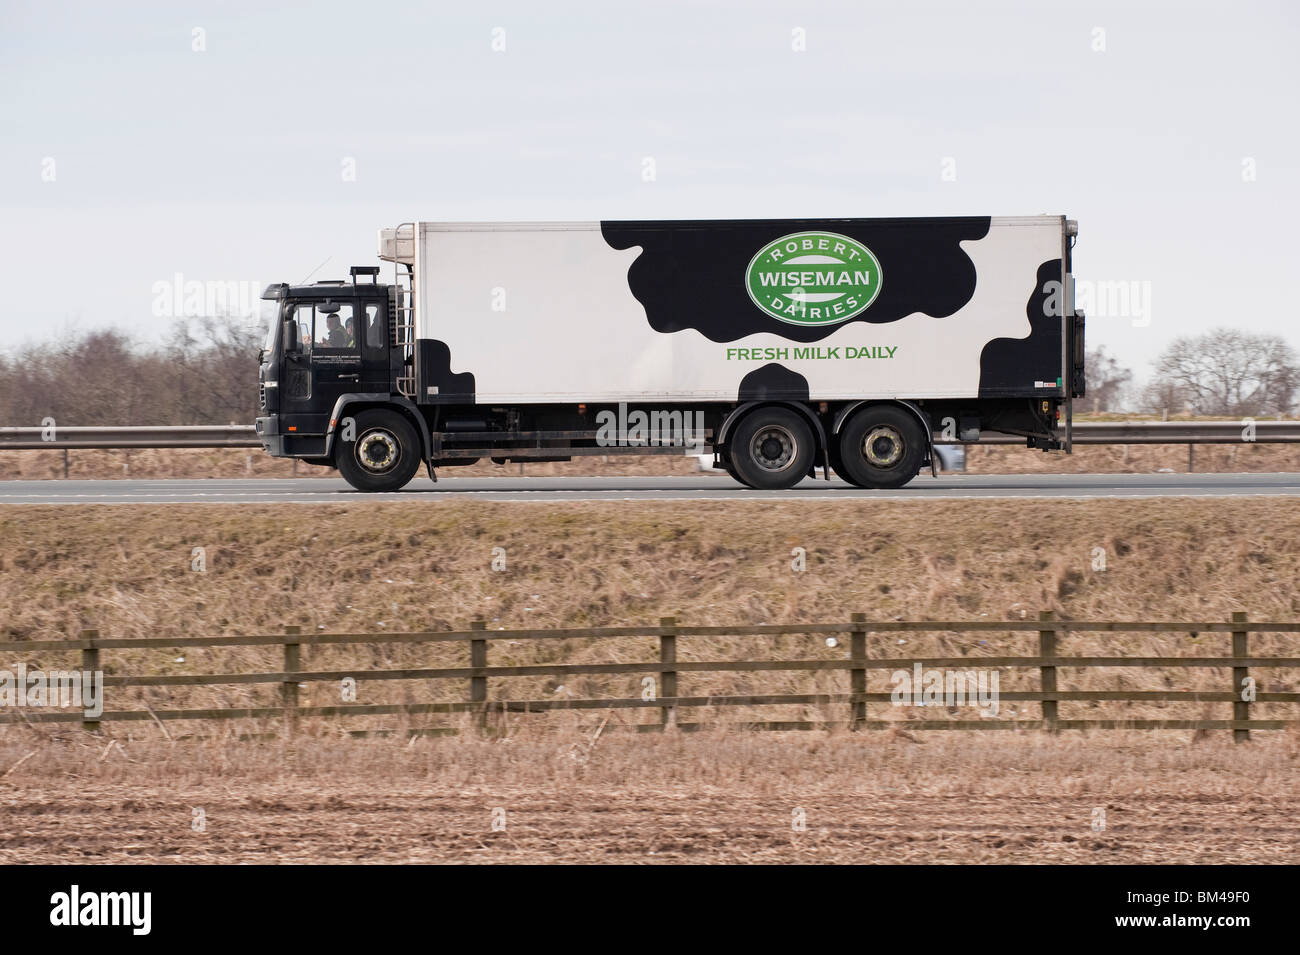 A lorry transporting goods for Robert Wiseman Dairies, travelling along a motorway. Stock Photo